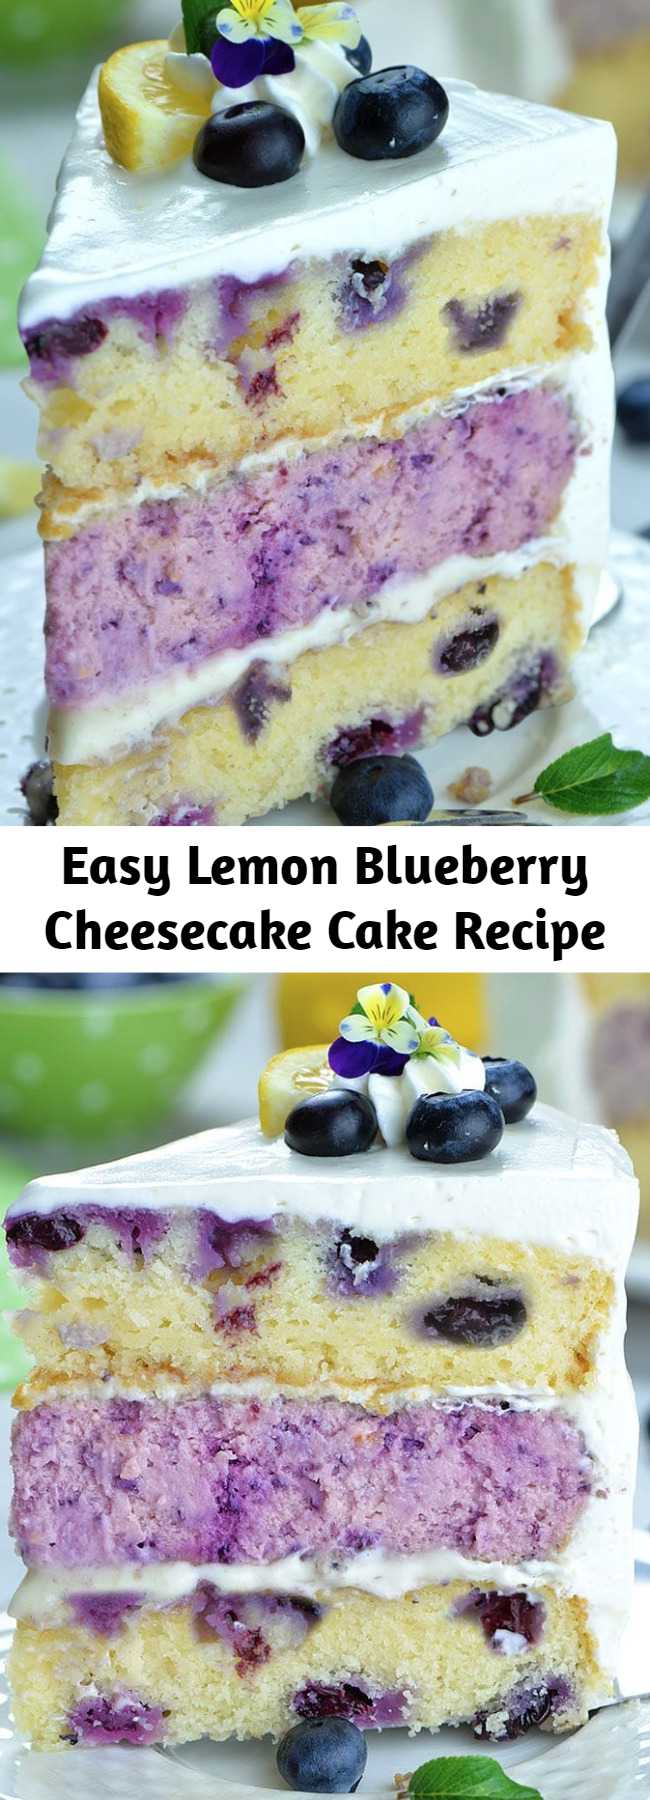 Easy Lemon Blueberry Cheesecake Cake Recipe - Lemon Blueberry Cheesecake Cake the perfect blueberry dessert for spring and summer! Made with a moist lemon cake dotted with juicy blueberries, blueberry cheesecake and sweet and tangy lemon cream cheese frosting.